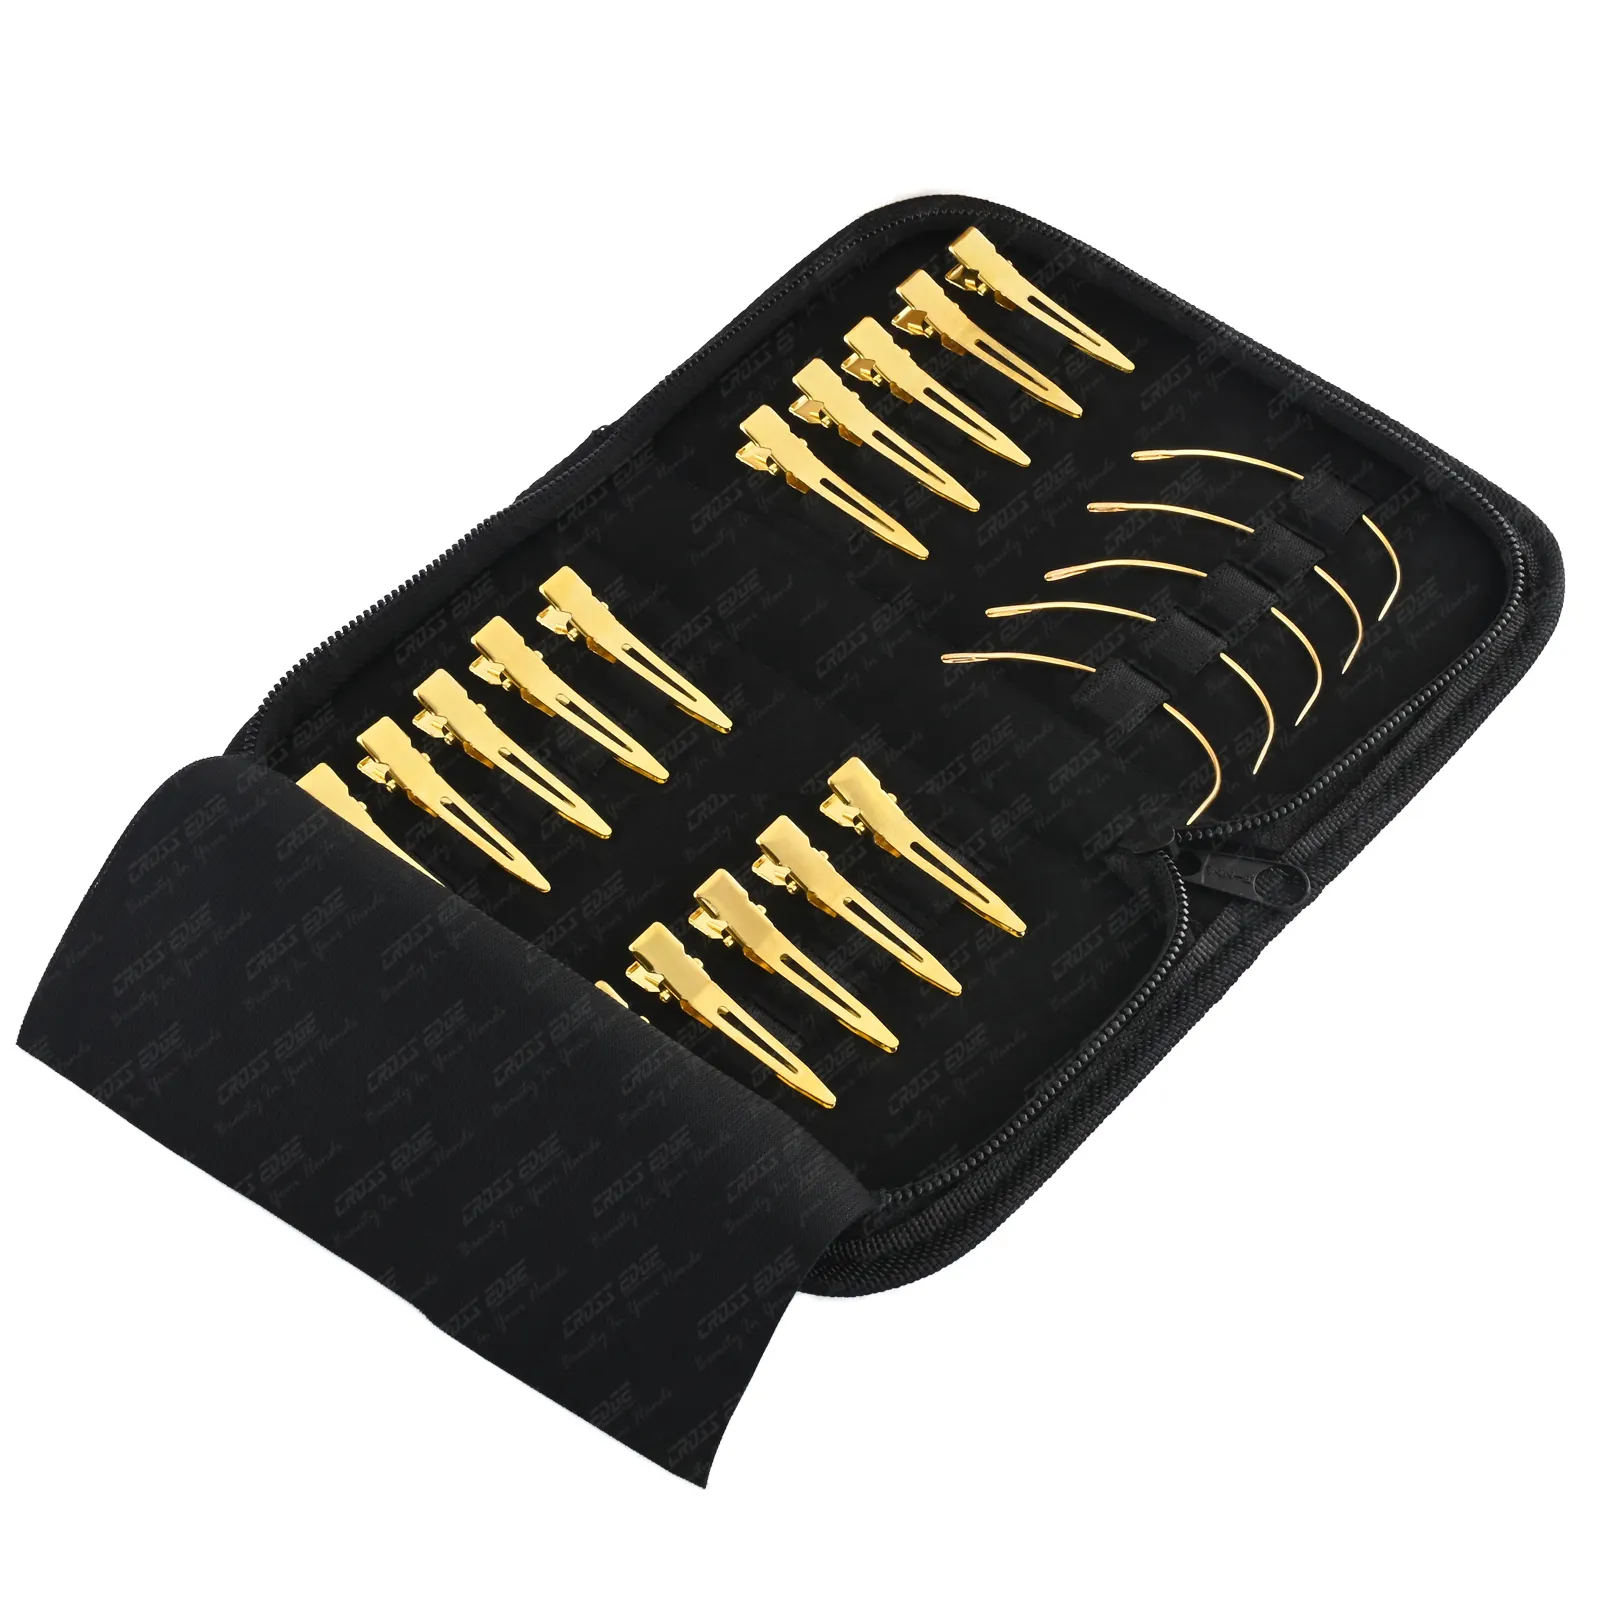 Classic Makeup Gold Elegant Design Metal Hairdresser Section Hair Clips & C Curved Needles Kit with black case